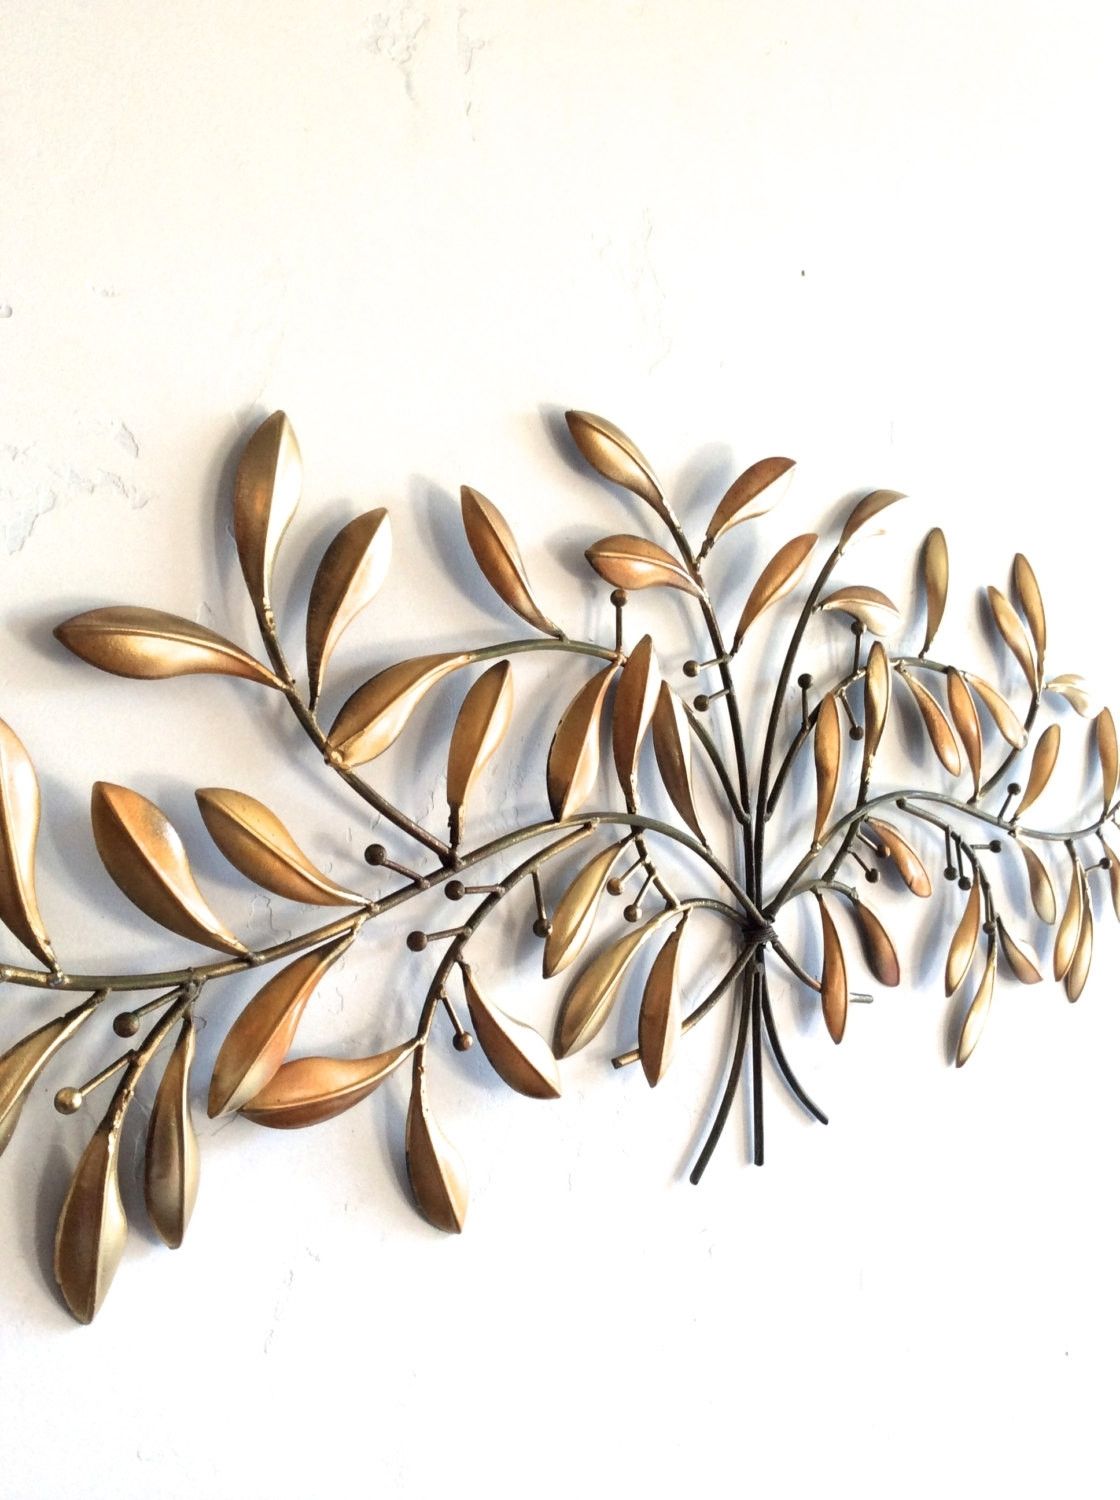 Gold Leaf Wall Decor Lovely Leaf Wall Art Gold Metal Wall Art Gold With Gold Metal Wall Art (View 9 of 20)